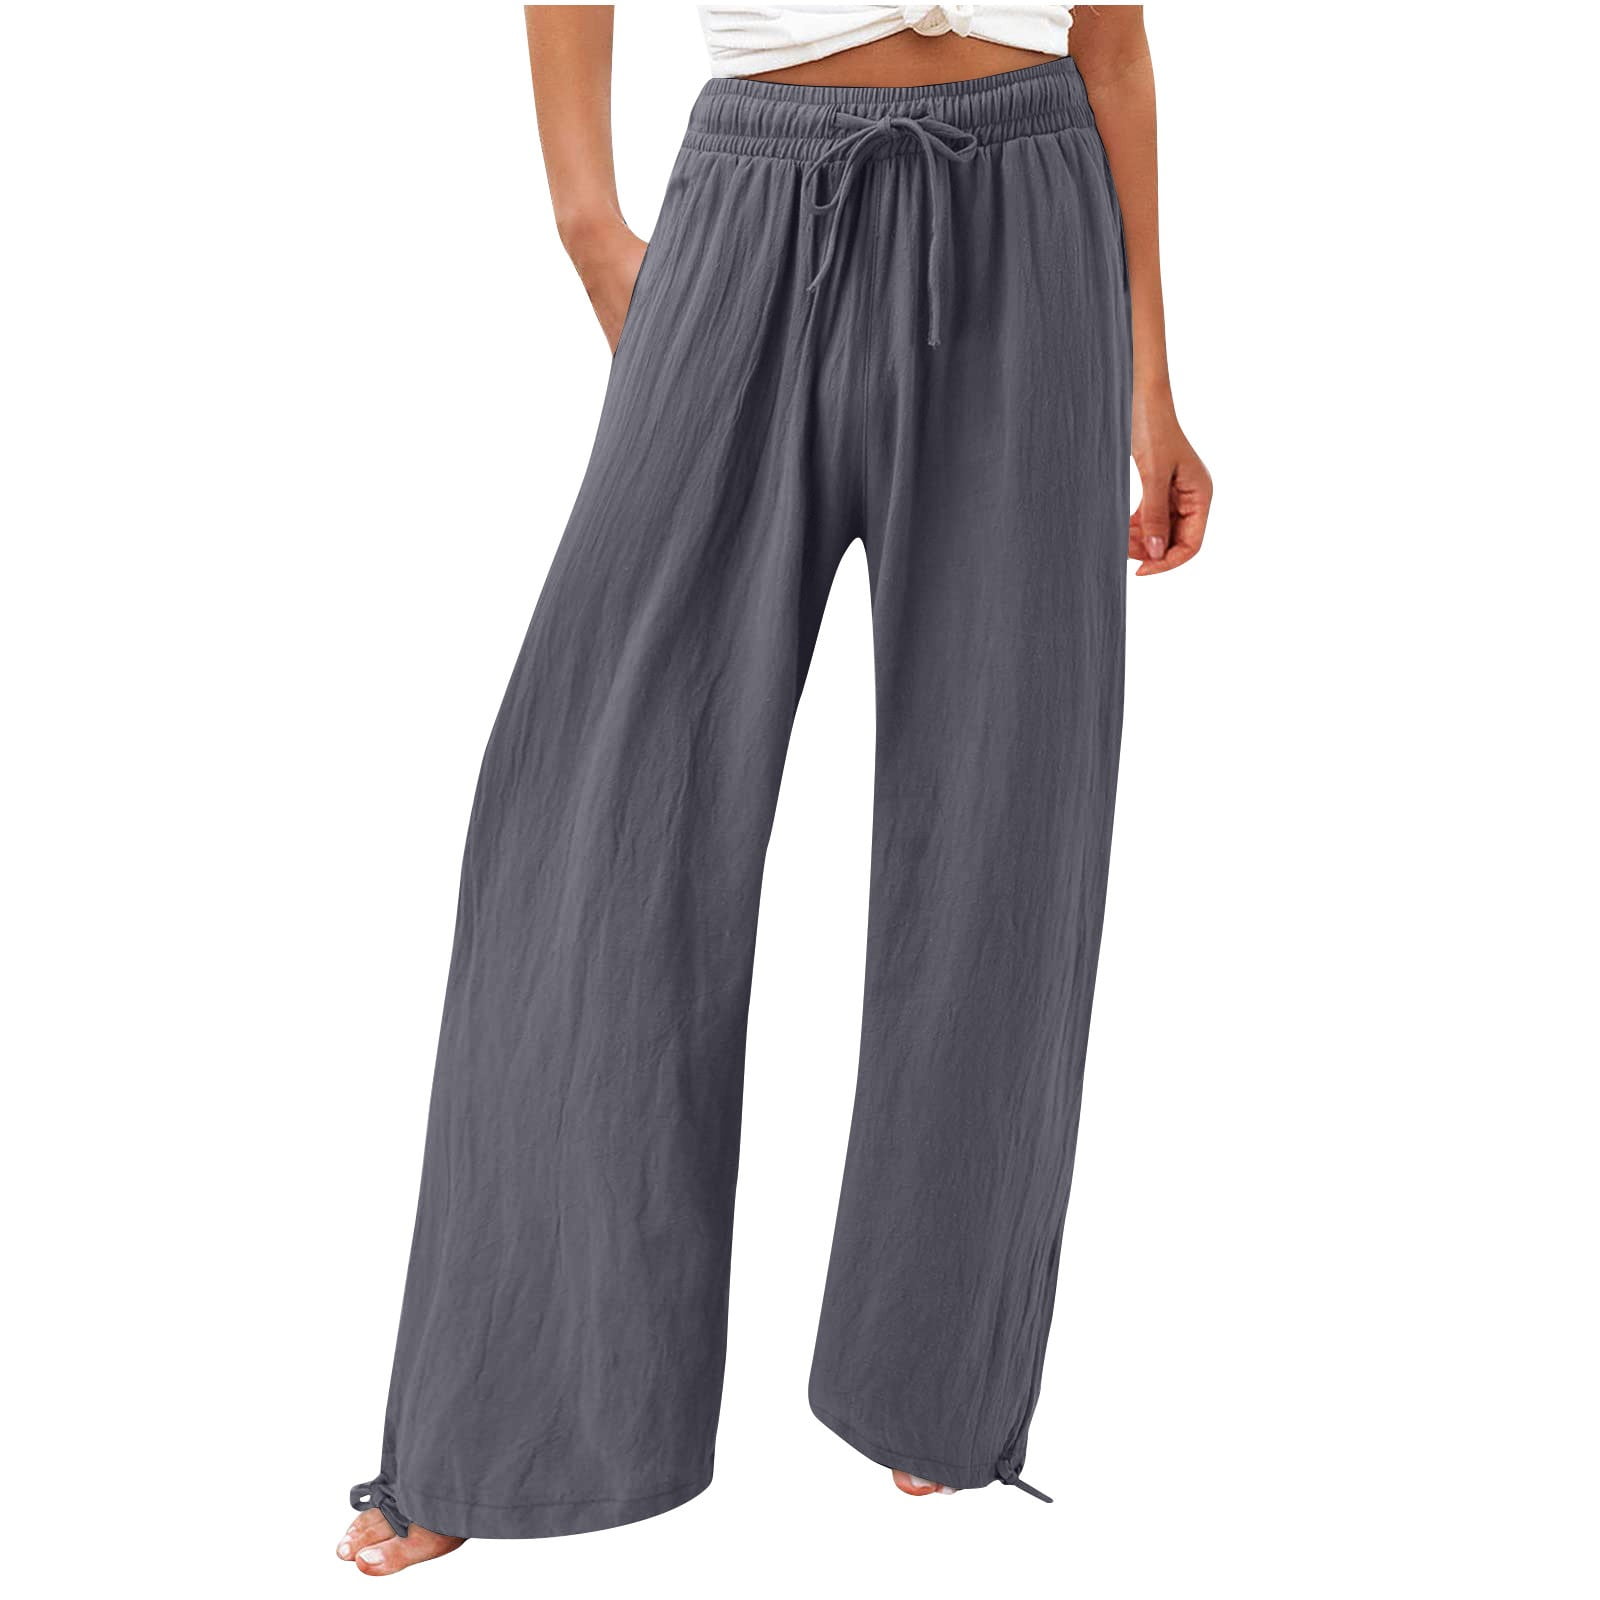 Qiaocaity Pants for Women Casual Summer Elastic High Waist Linen Pant  Pockets Straight Leg Pant Cropped Trouser Gray L 